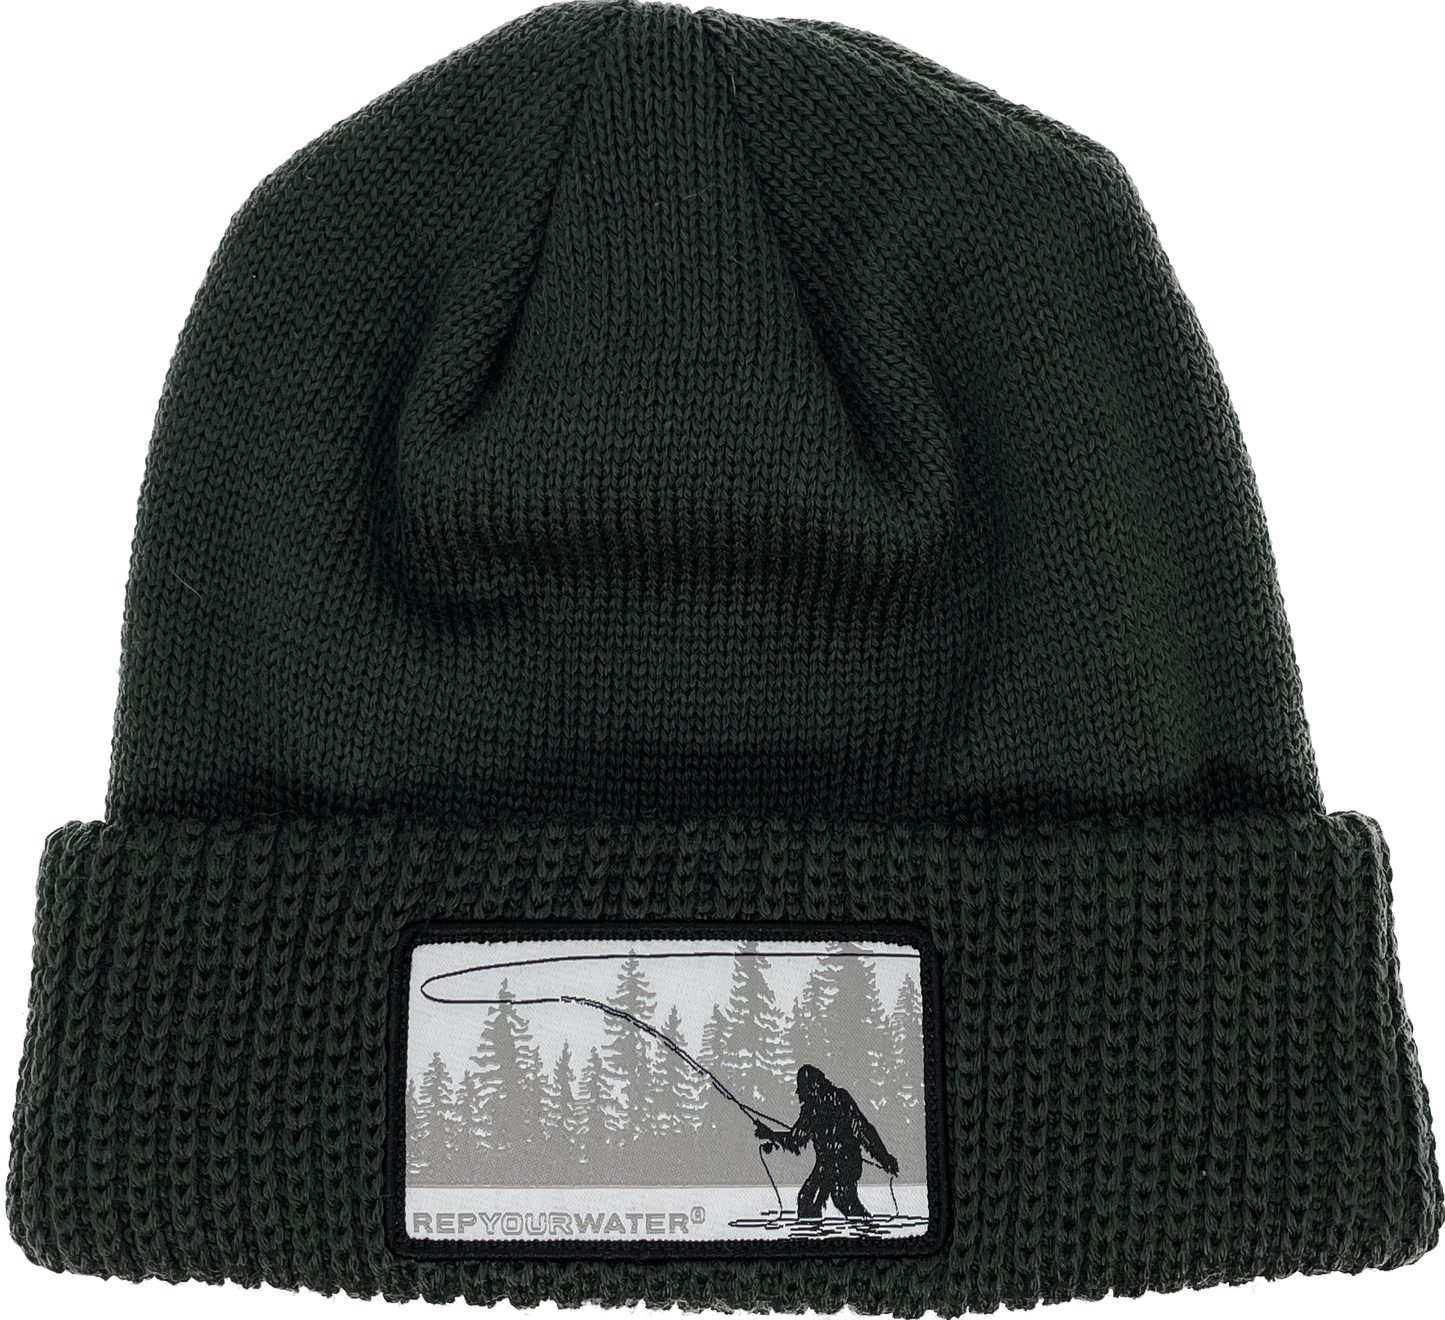 A dark forest green winter hat with a cuff and a rectangular patch of a sasquatch casting with a line of trees in the background